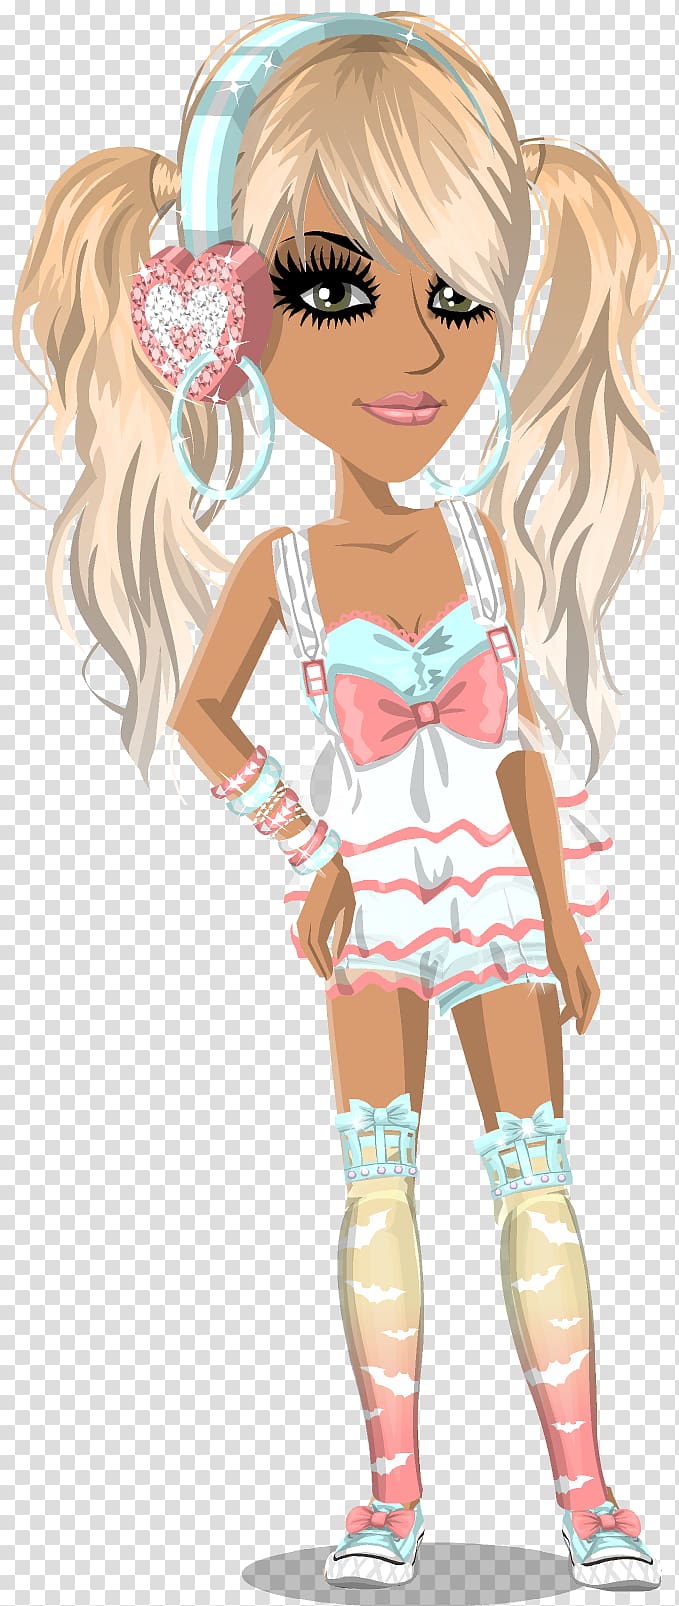 MovieStarPlanet YouTube Nerd Fashion Game, carnival outfits transparent background PNG clipart